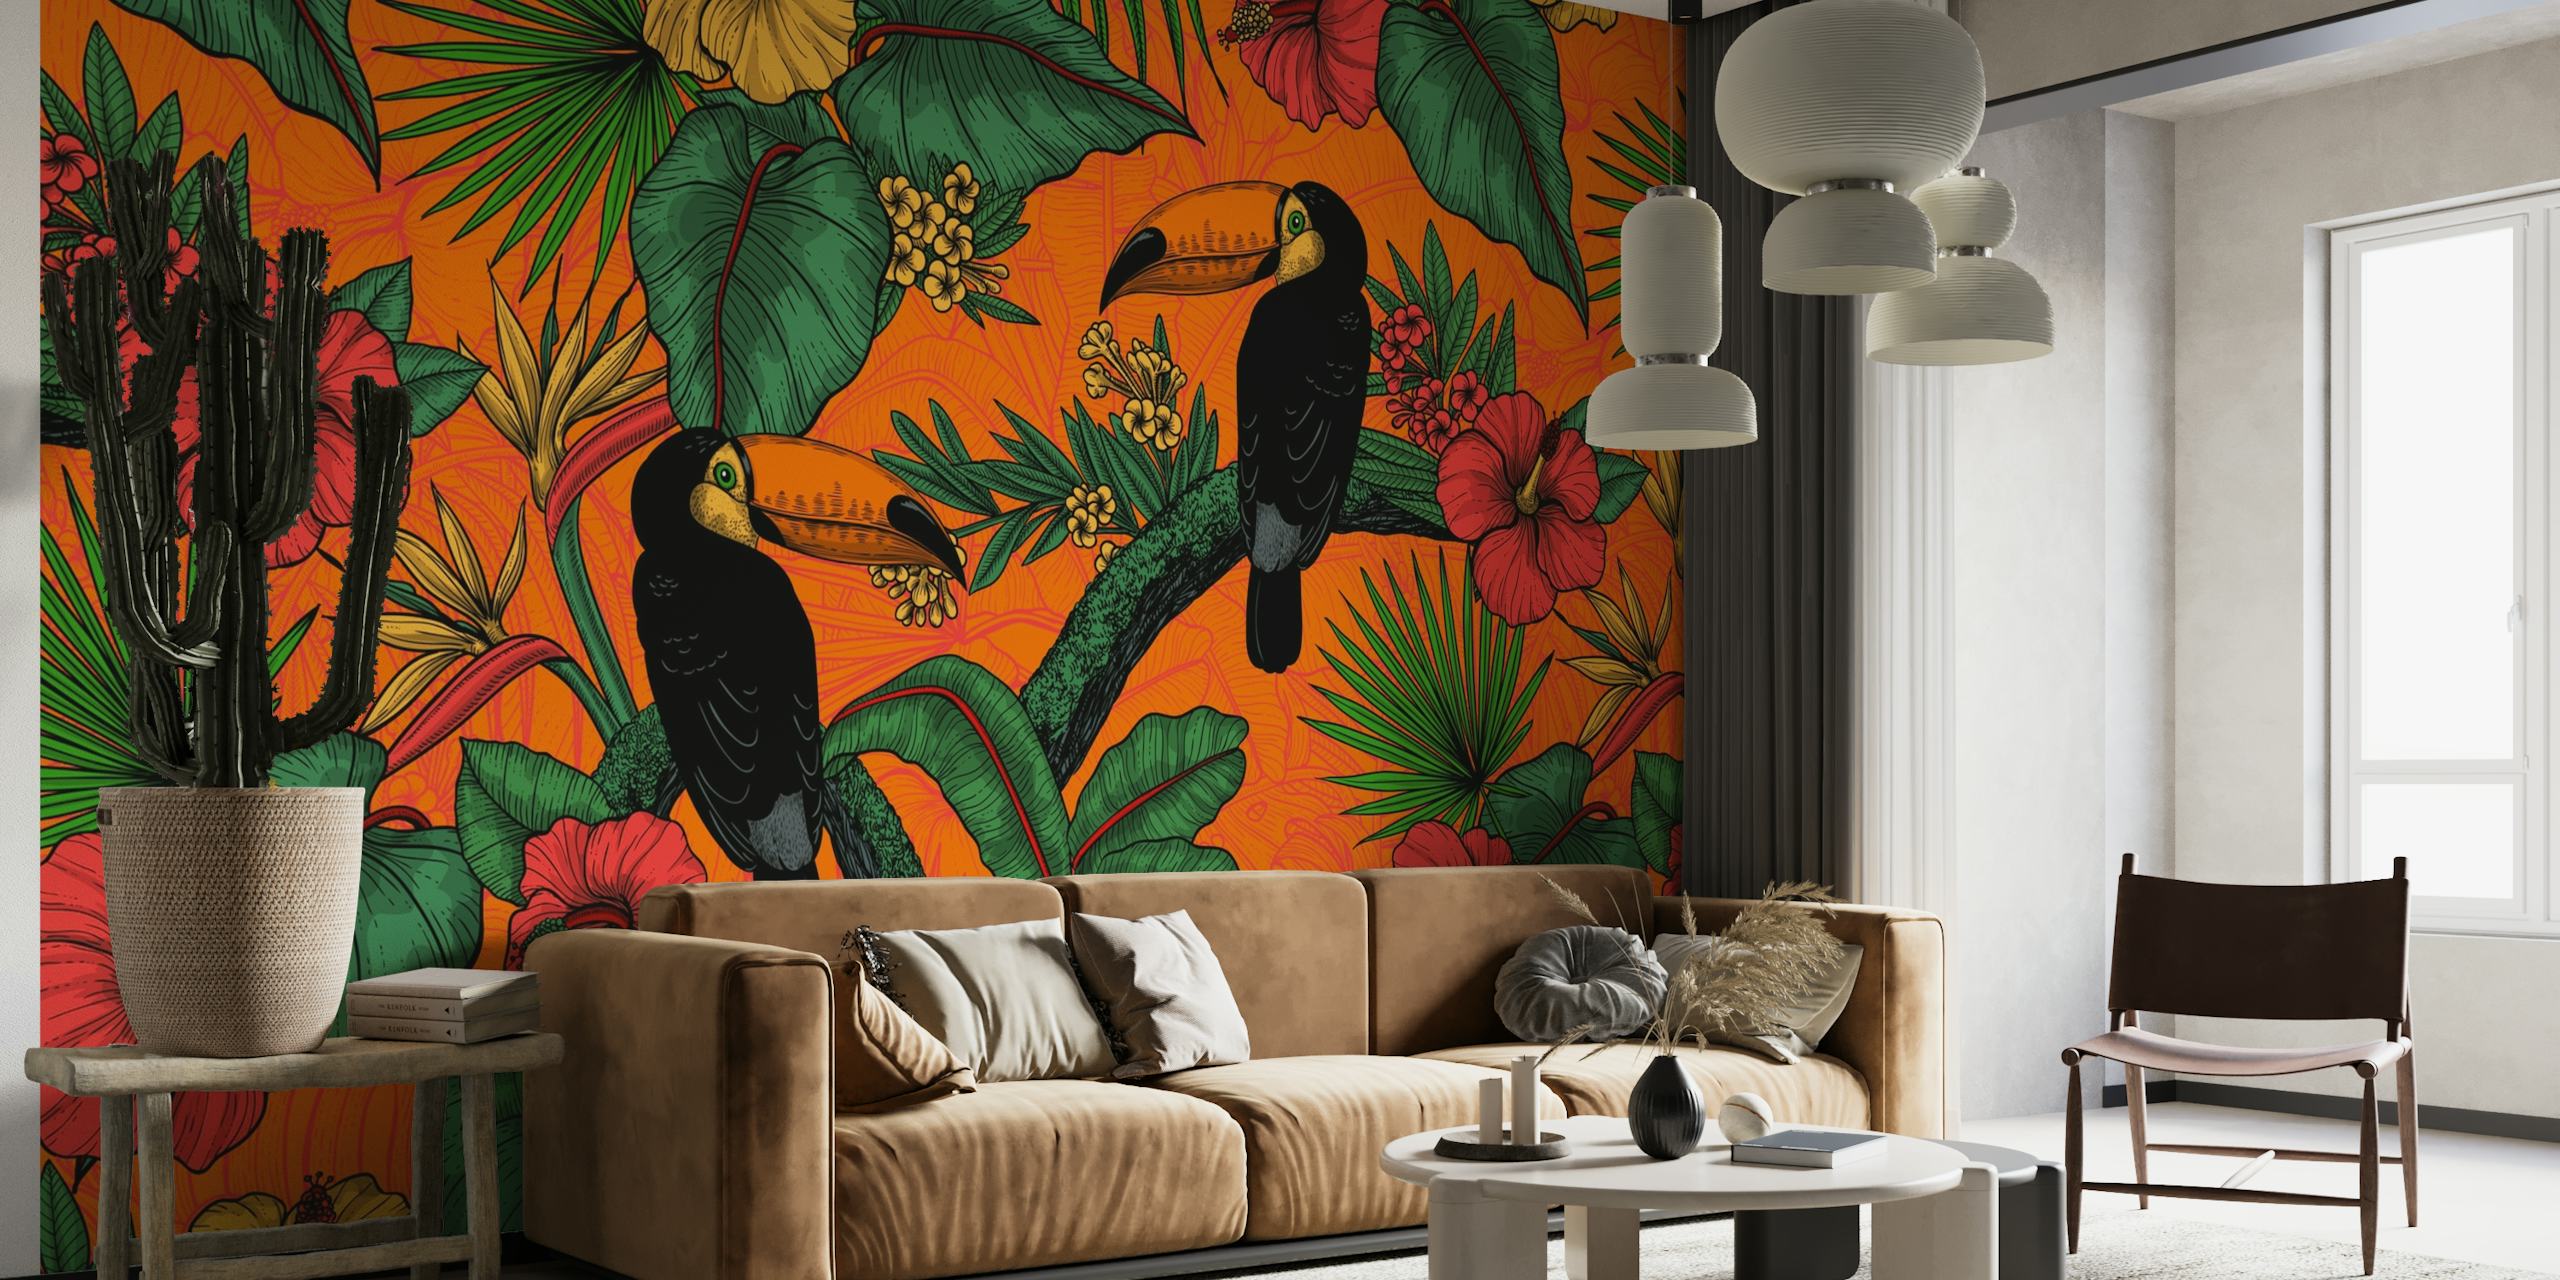 Tropical toucan wall mural with colorful flowers and lush green leaves on an orange background